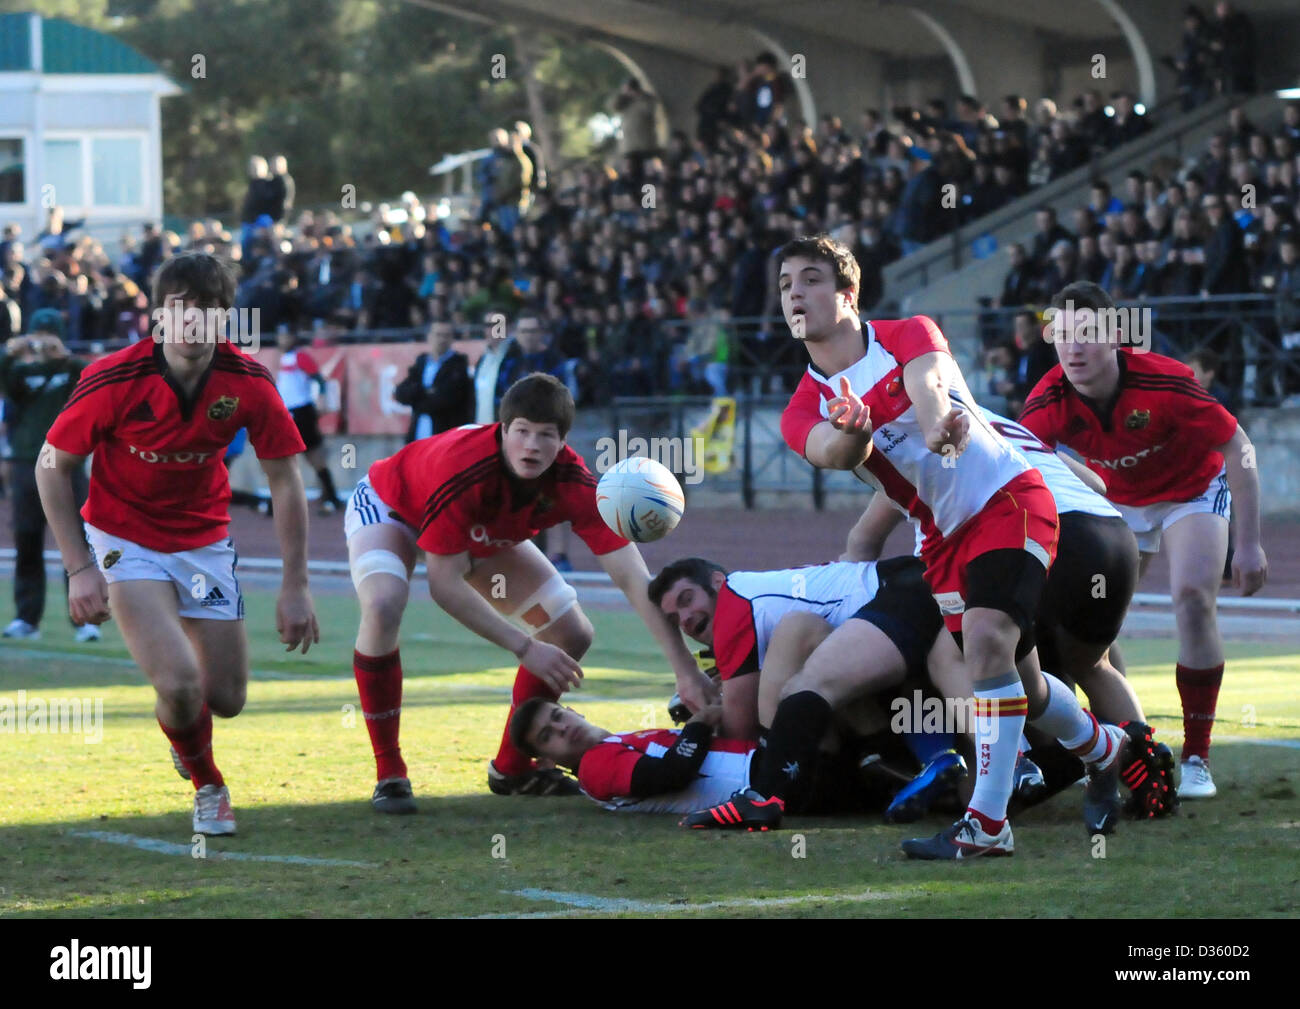 Barcelona, Spain. 10th February 2013. Munster Rugby Academy (Barcelona, Feb.10th, 2013) Half scrum Hector Velazco (who plays with USAP of Perpignan) clears the ball from a ruck. Credit: Monica Condeminas / Alamy Live News Stock Photo